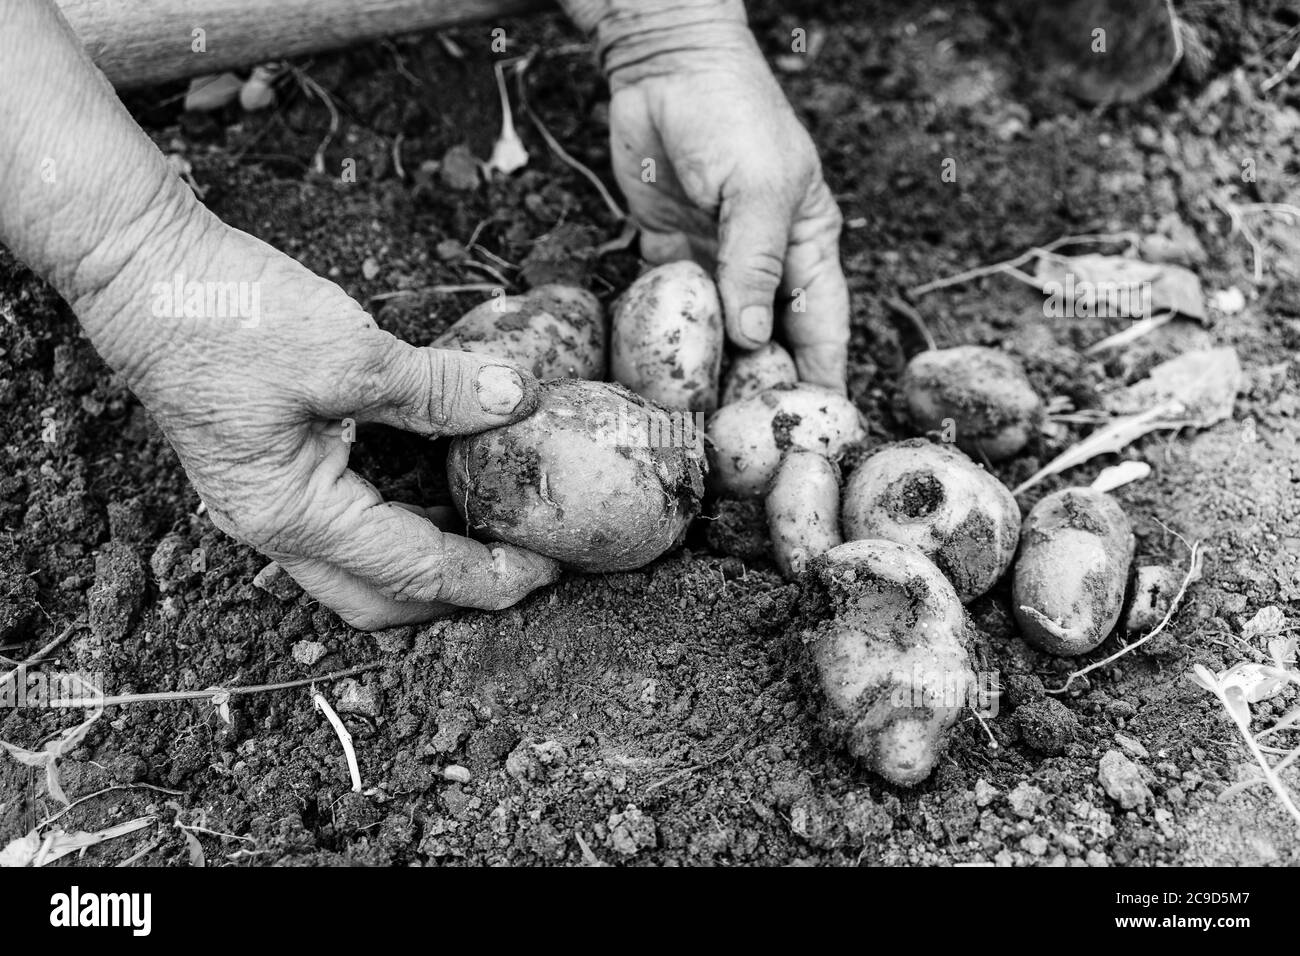 Harvesting and digging potatoes with hoe and hand in garden. Digging organic potatoes by dirty hard worked and wrinkled hand . Stock Photo